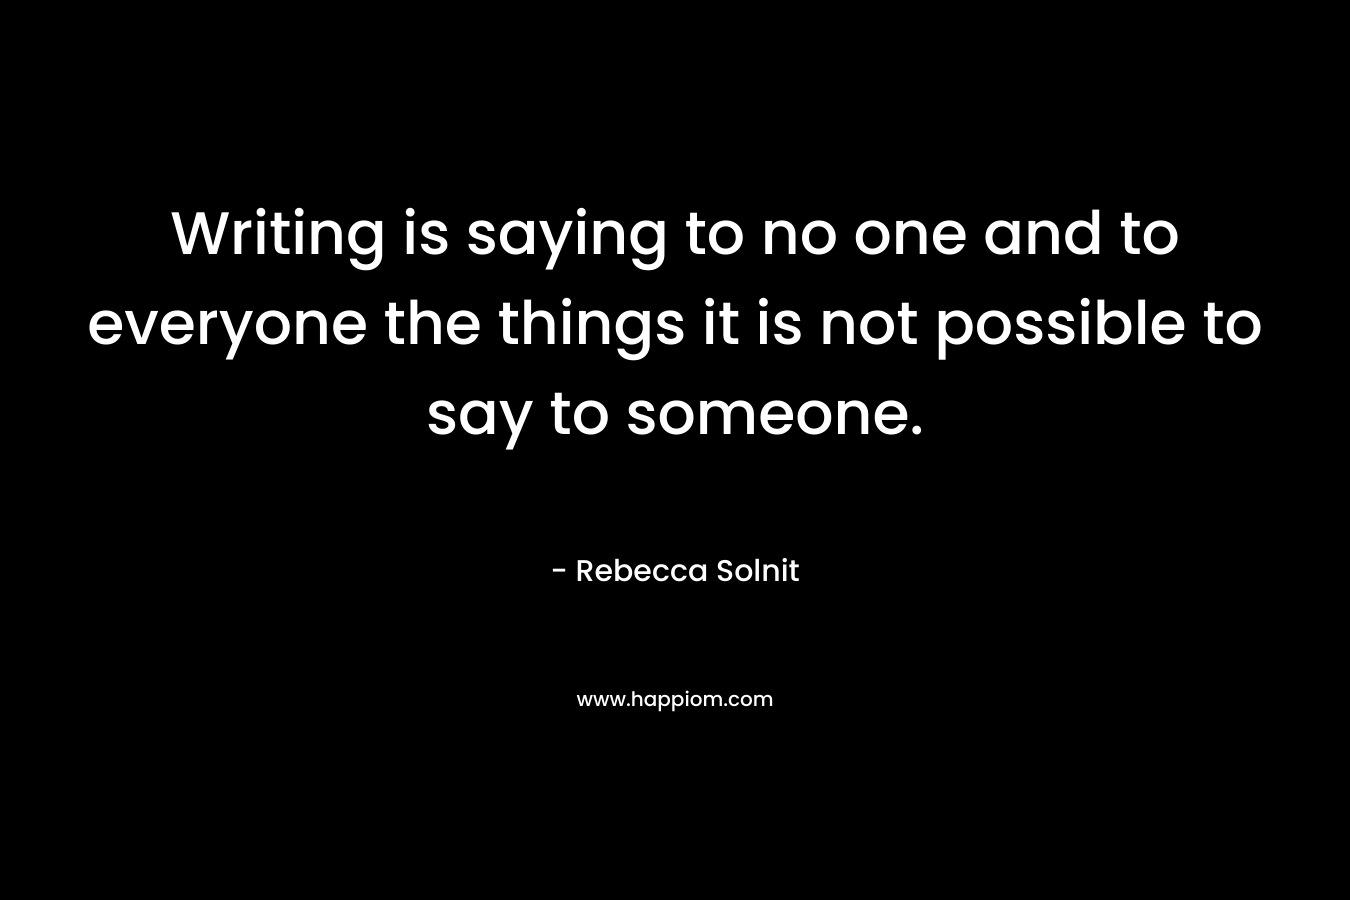 Writing is saying to no one and to everyone the things it is not possible to say to someone.